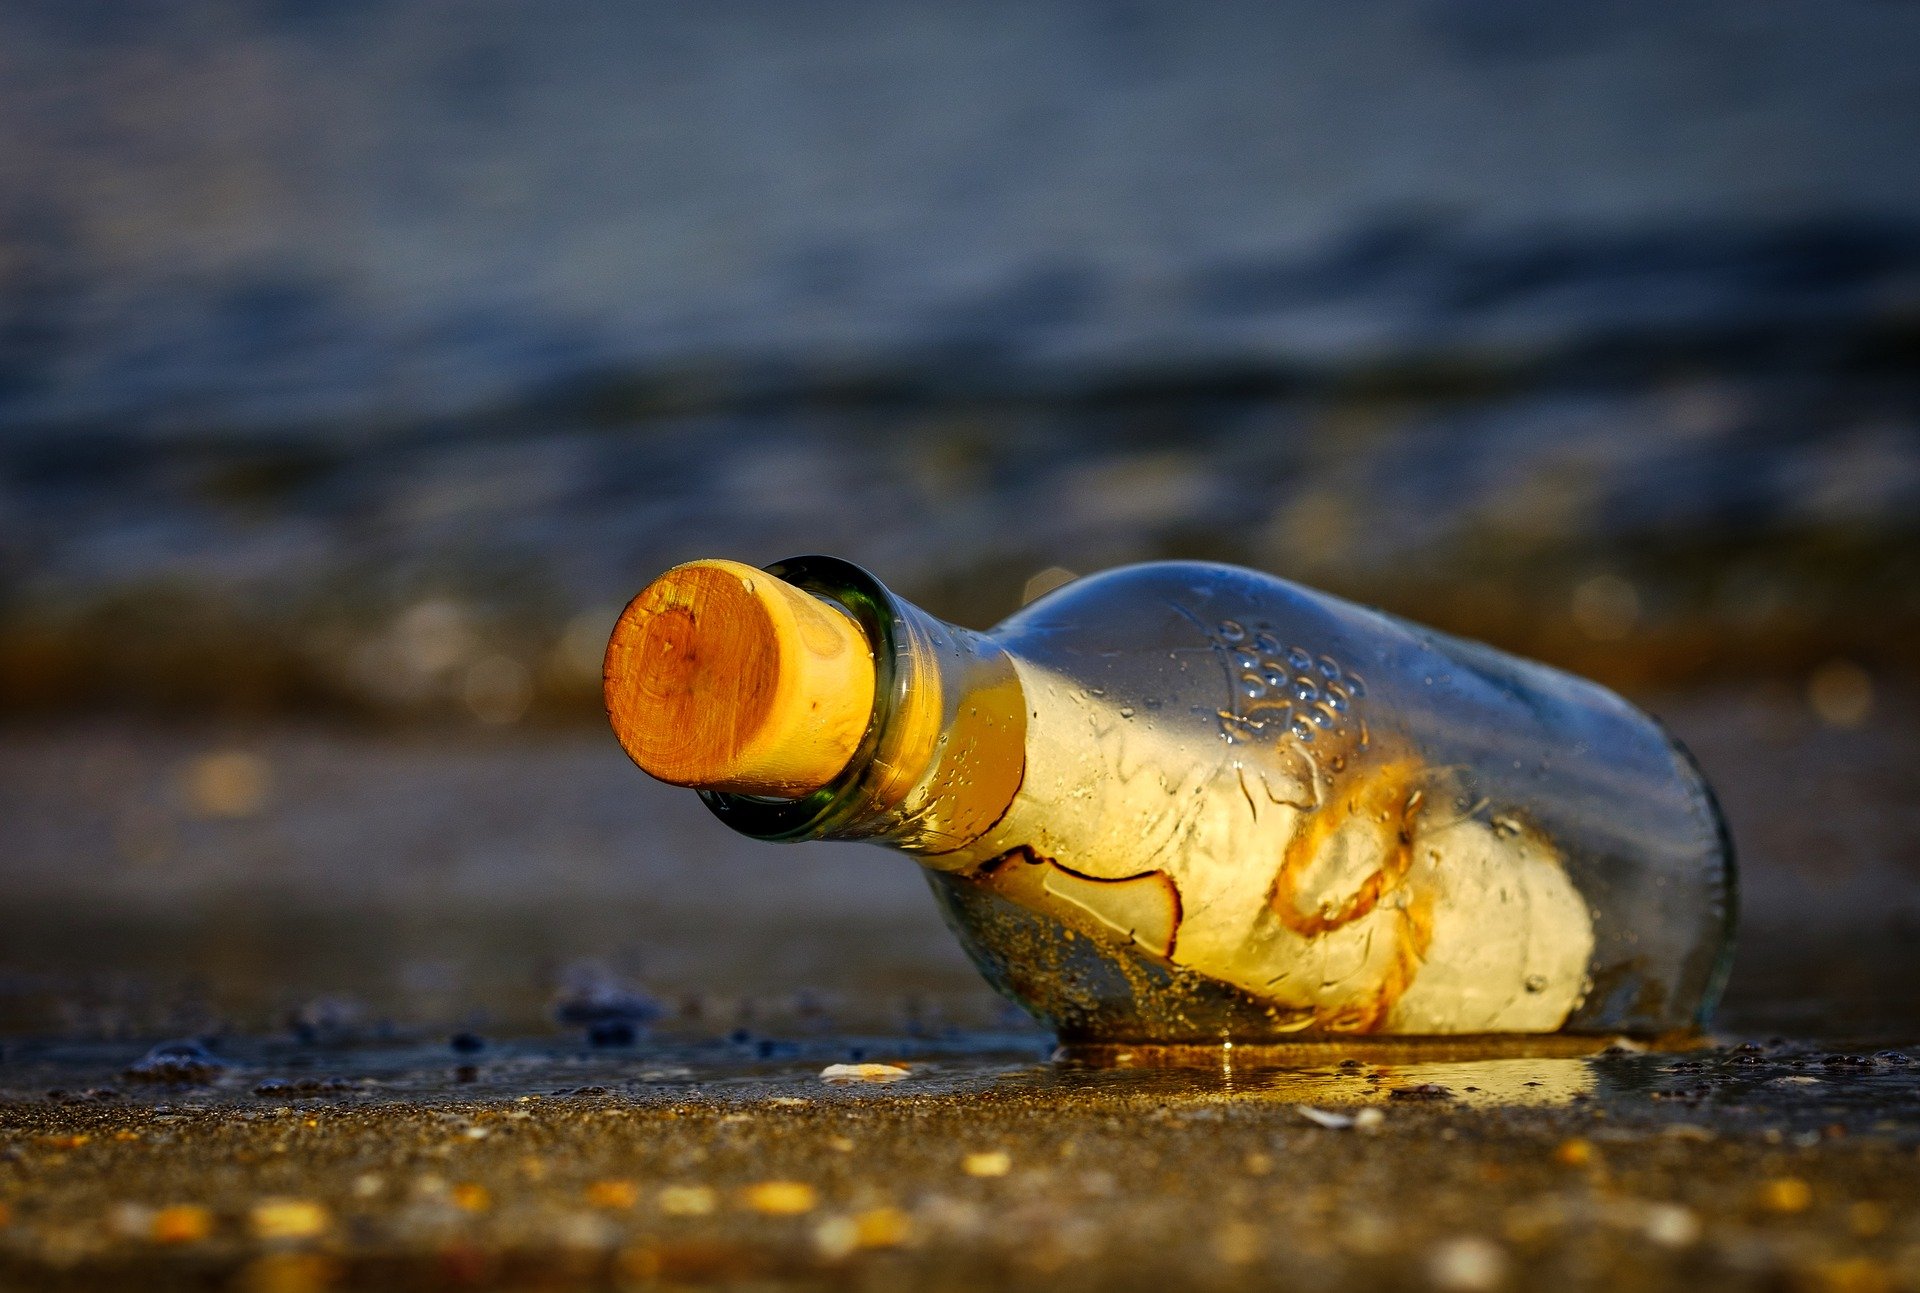 A message in a bottle lying on a beach.